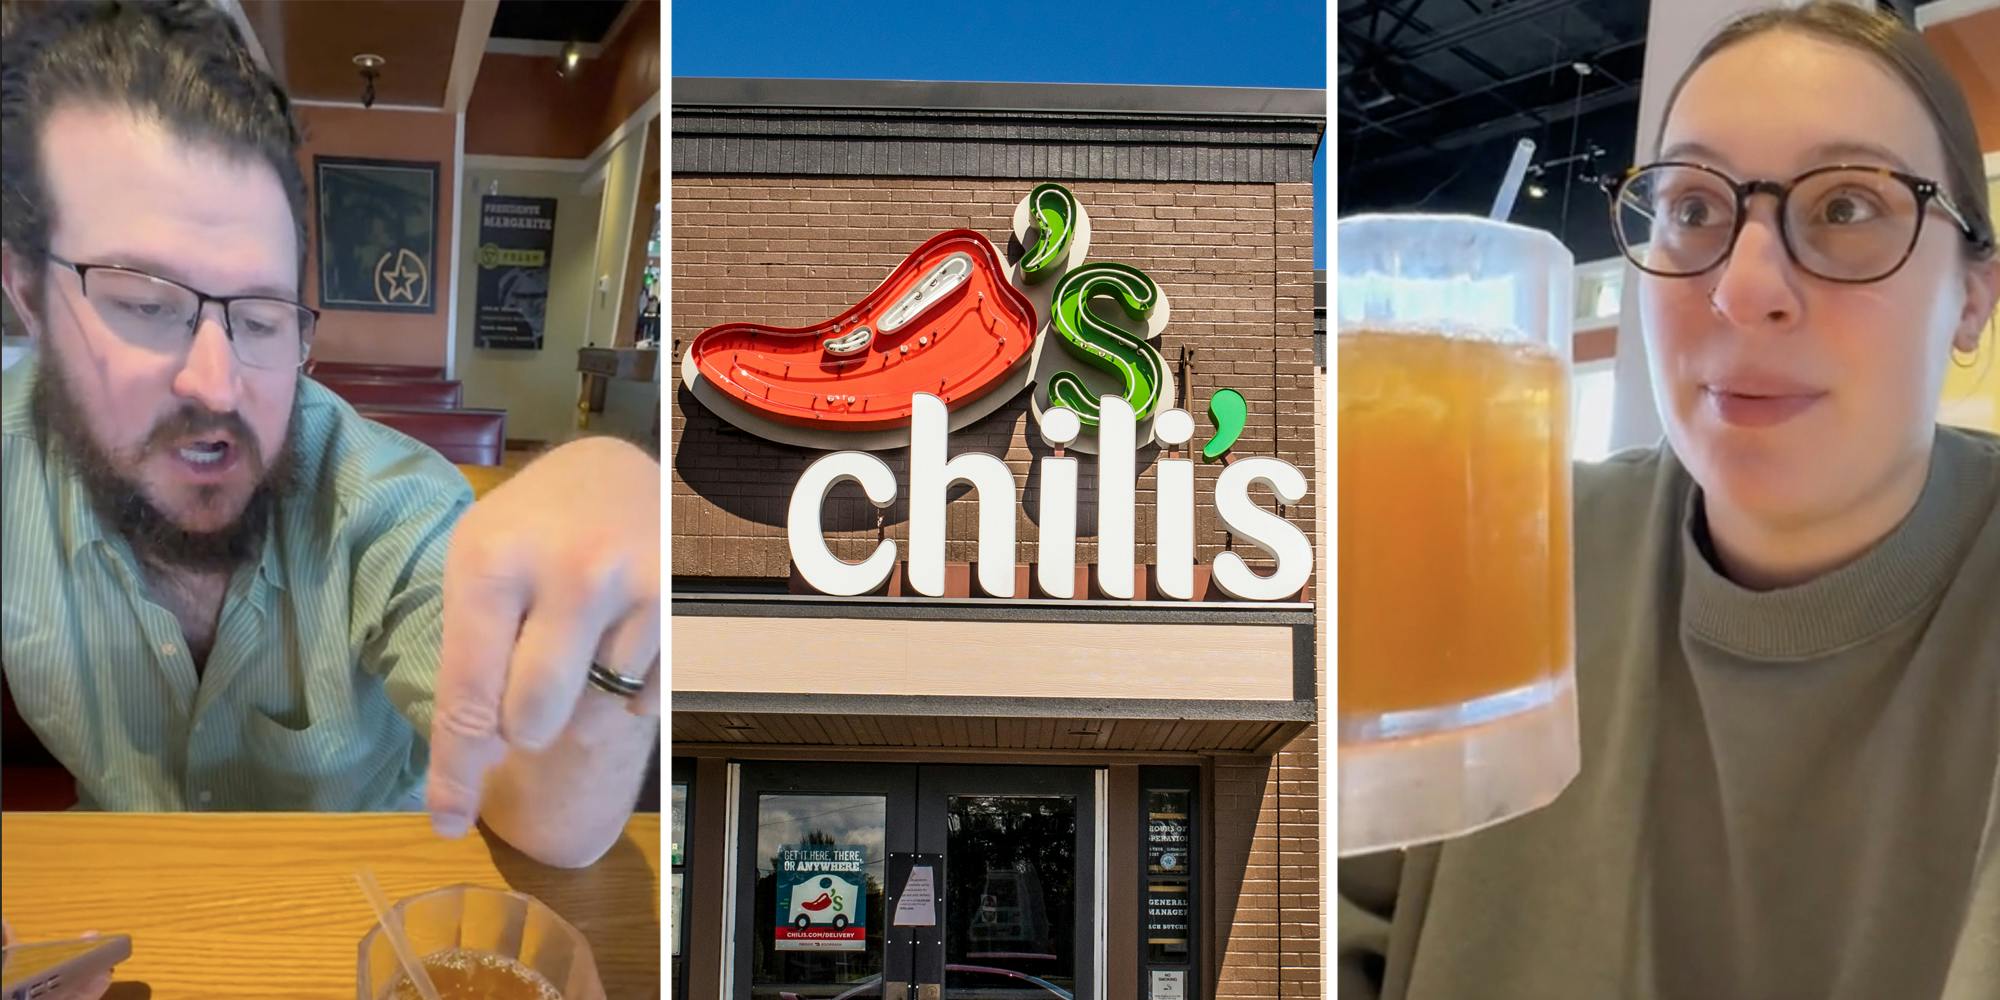 Man pointing to drink(l), Chili's(c), Woman holding drink(r)